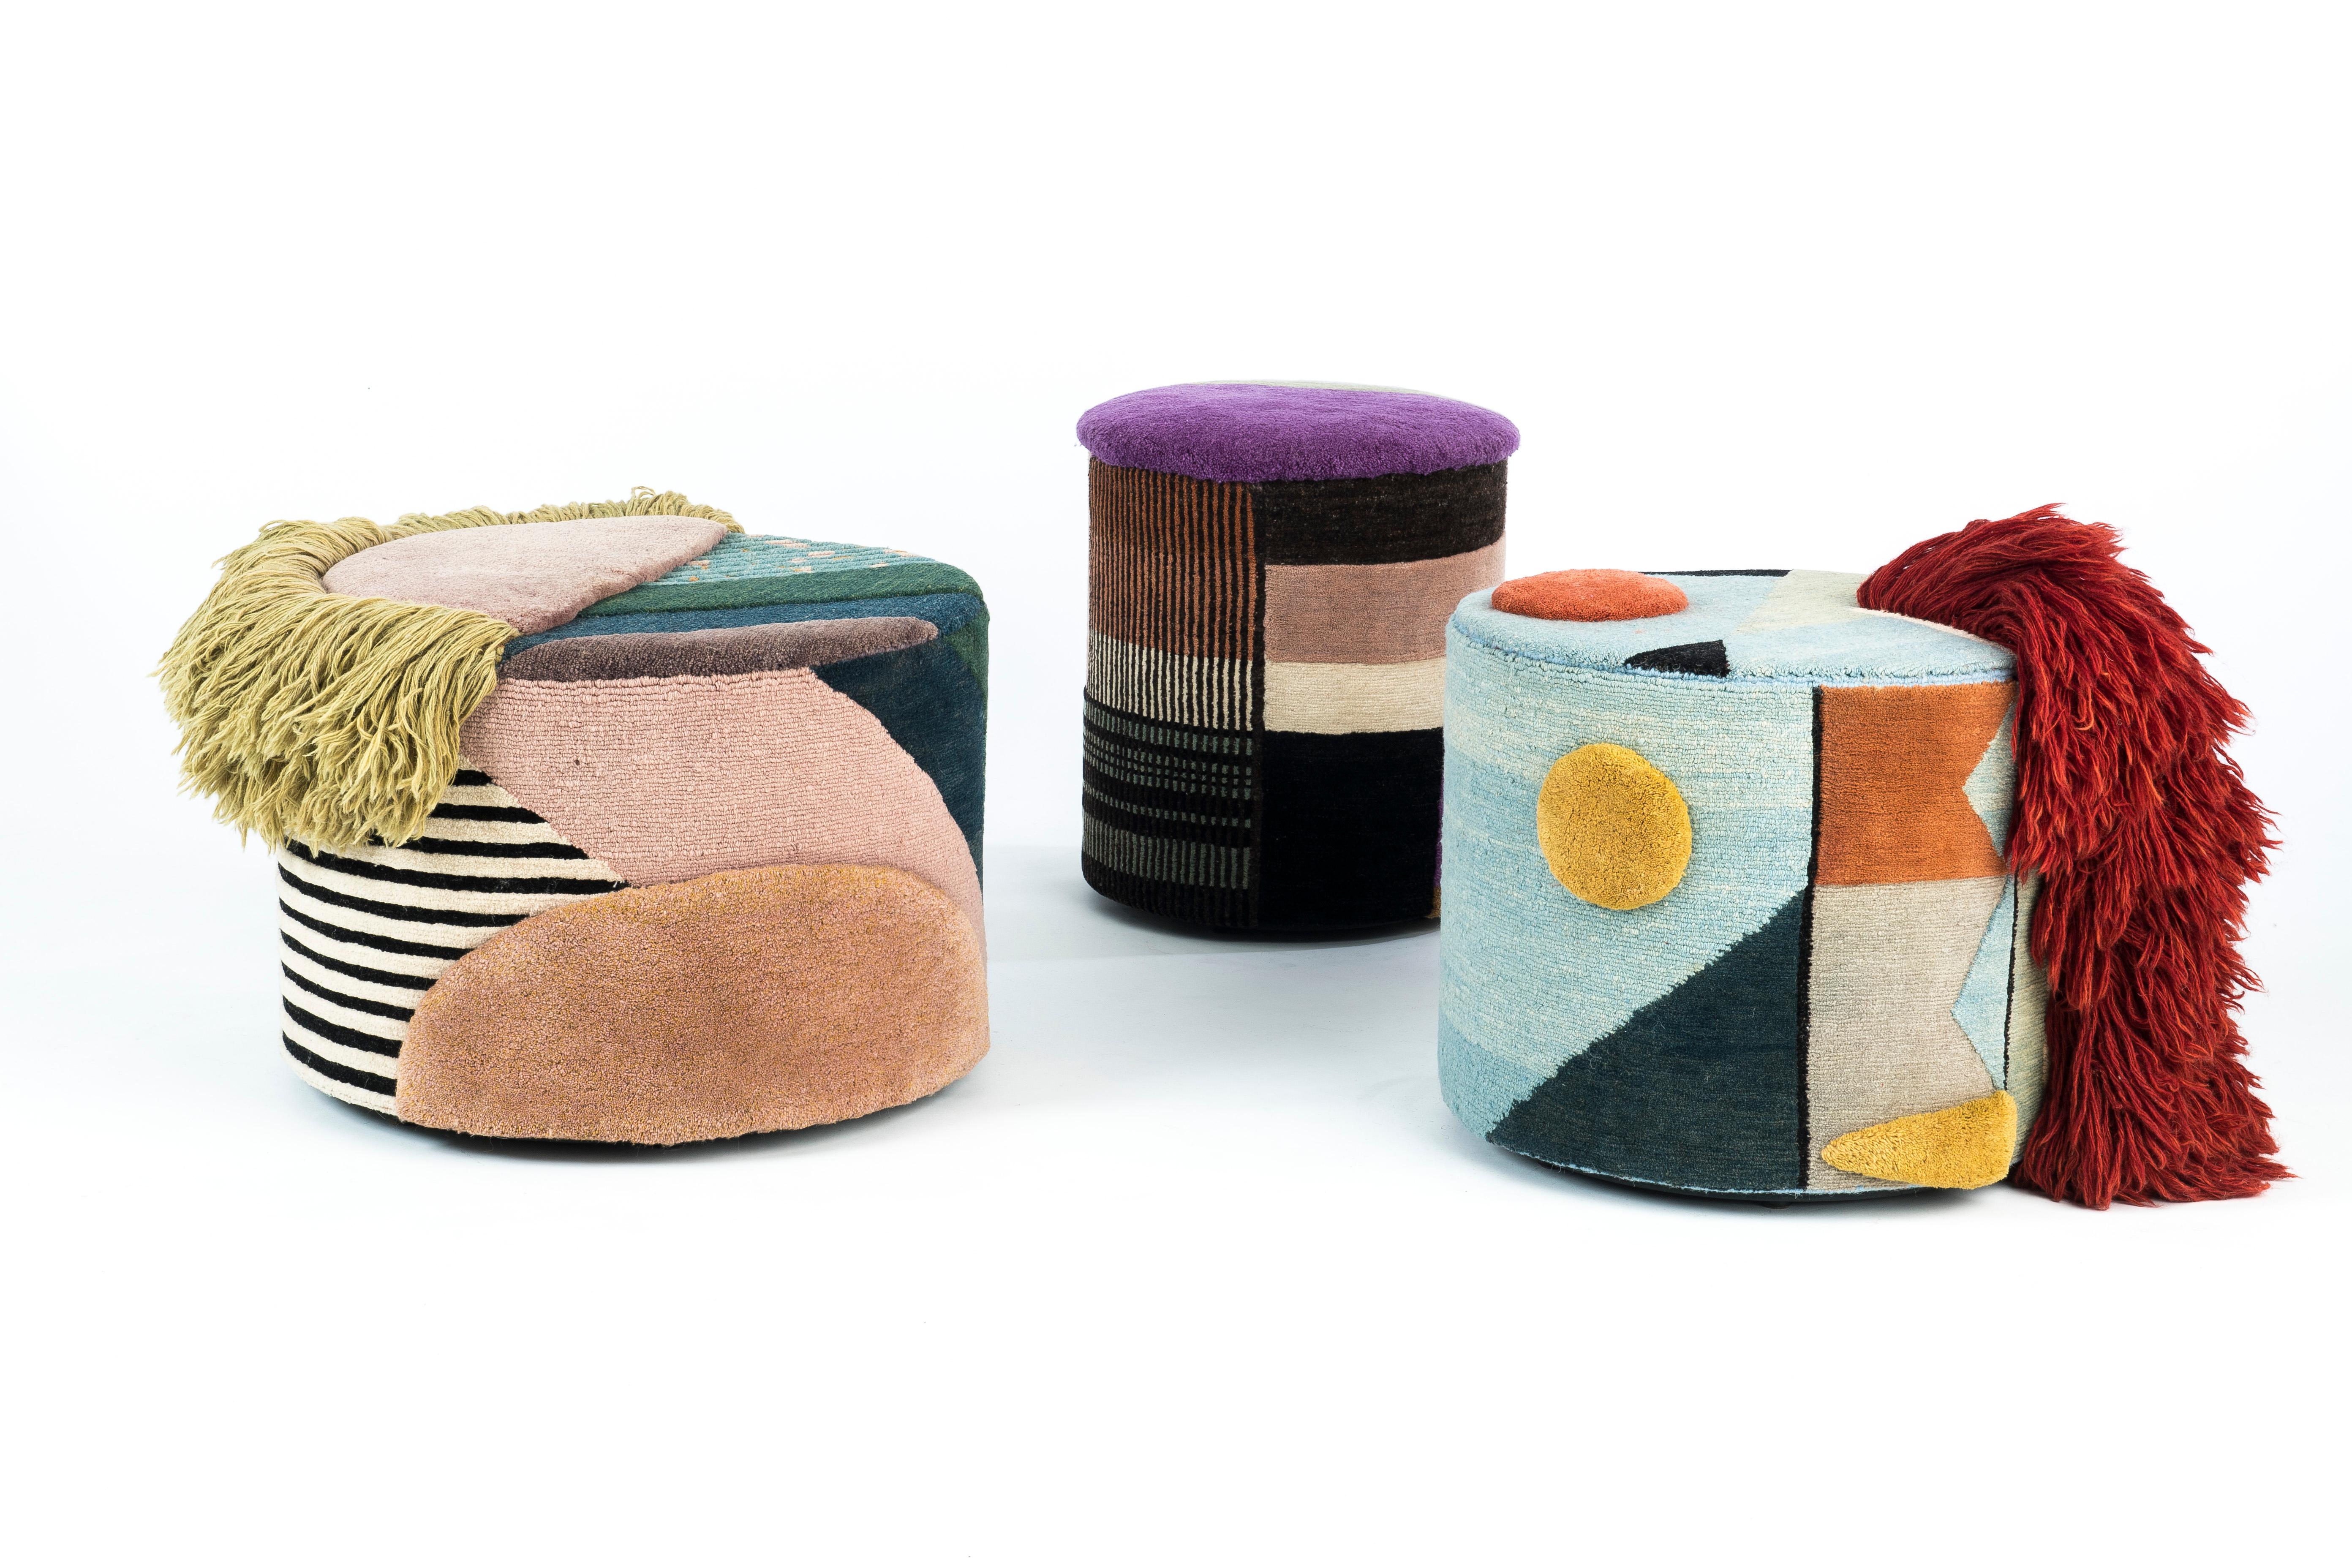 Set of 3 Poufs Charaktere Fred, Massimiliano and Colette by Lyk Carpet
Dimensions:
Fred: Ø 44 x H 52 cm
Massimiliano: Ø 53 x H 47 cm
Colette: Ø 62 x H 47 cm.
Materials: 100% tibetan highland-wool, new pure hand-combed and hand-spun wool,